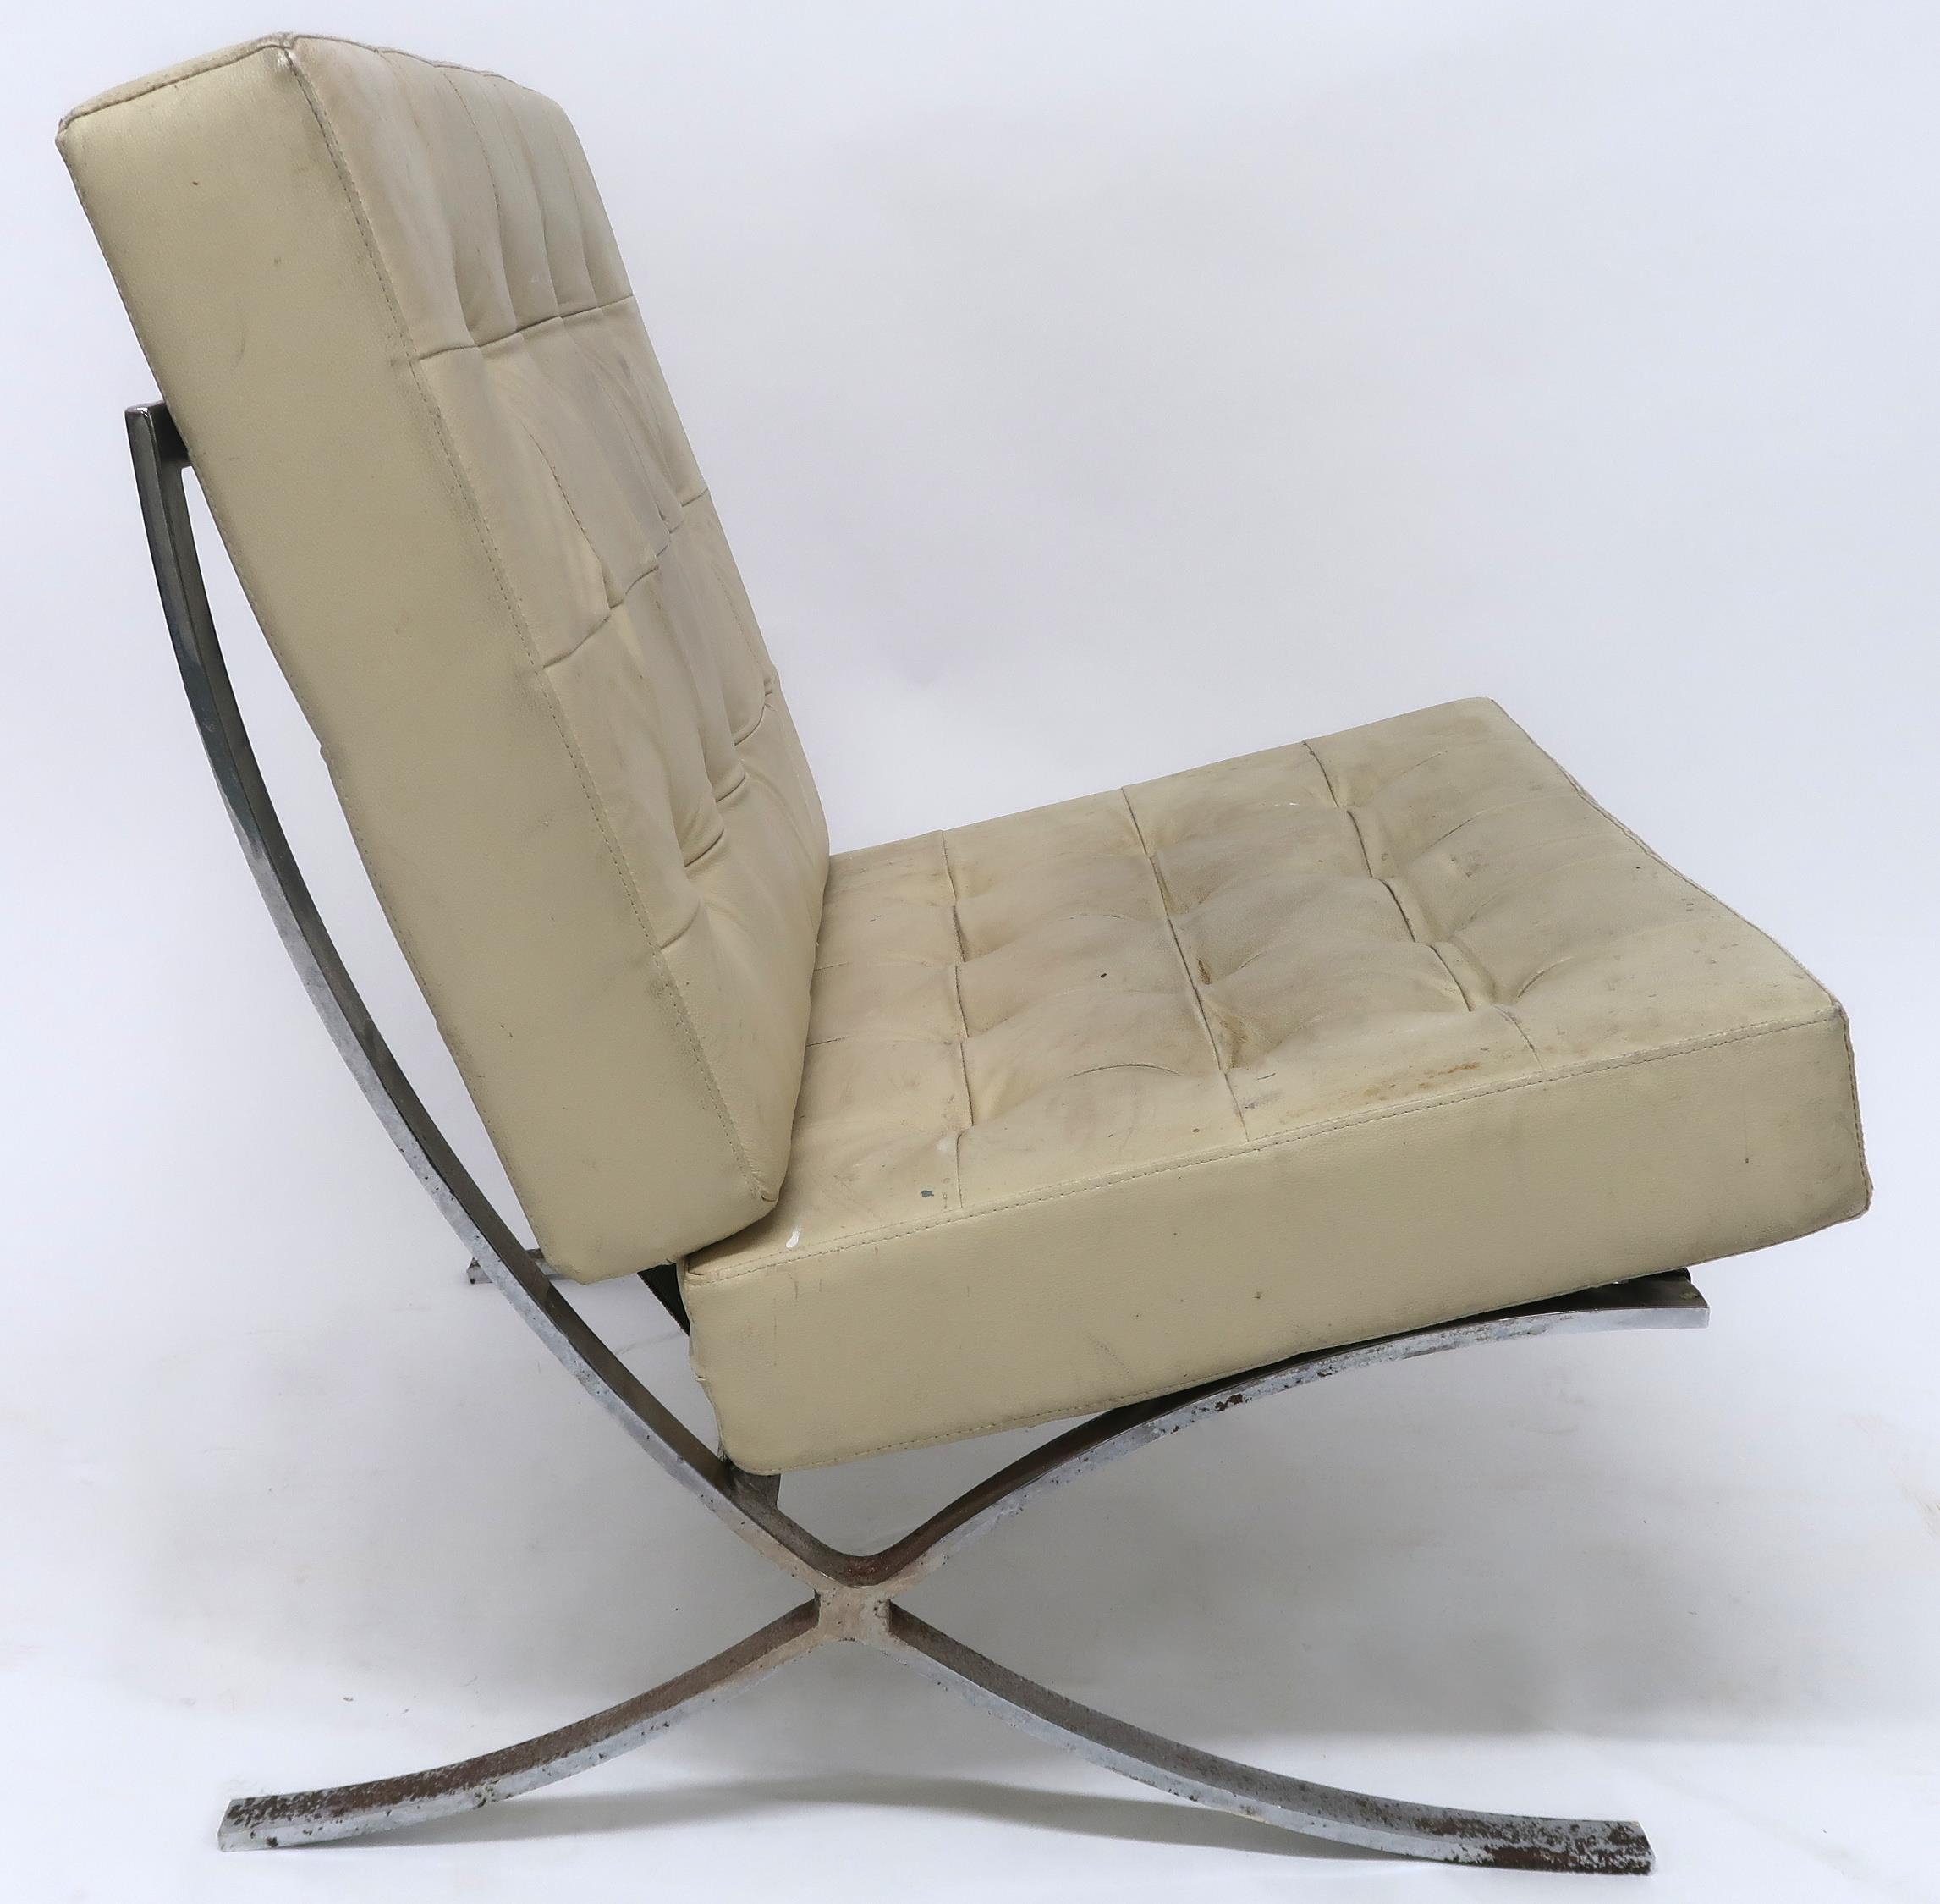 A 20TH CENTURY AFTER LUDWIG MIES VAN DER ROHE "BARCELONA" CHAIR with cream vinyl button back - Image 2 of 7